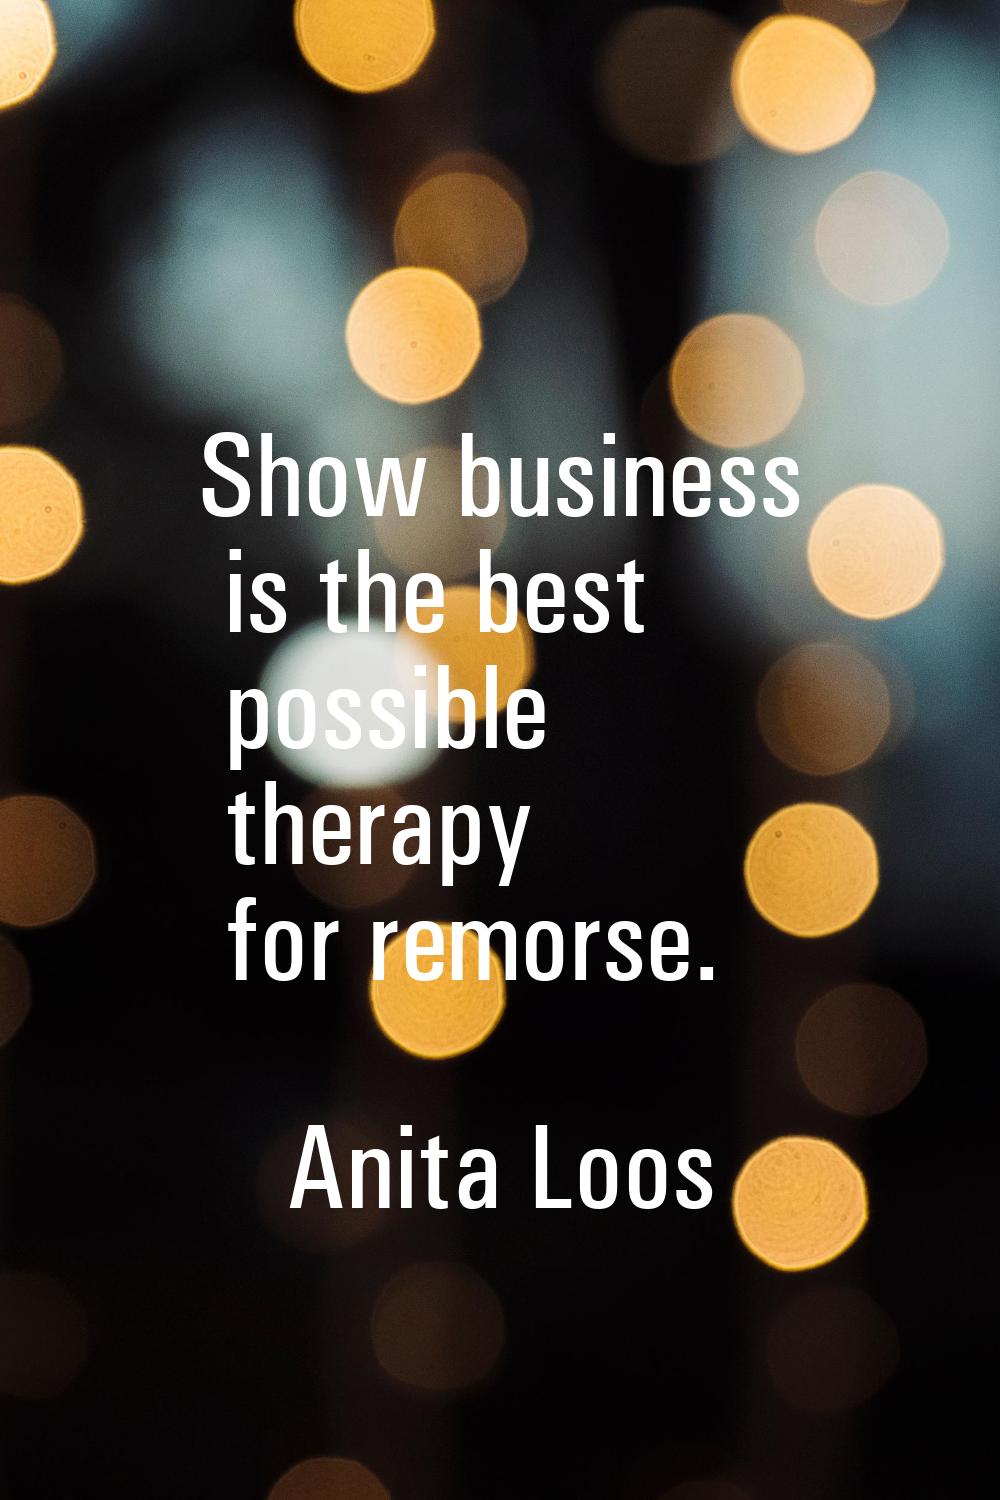 Show business is the best possible therapy for remorse.